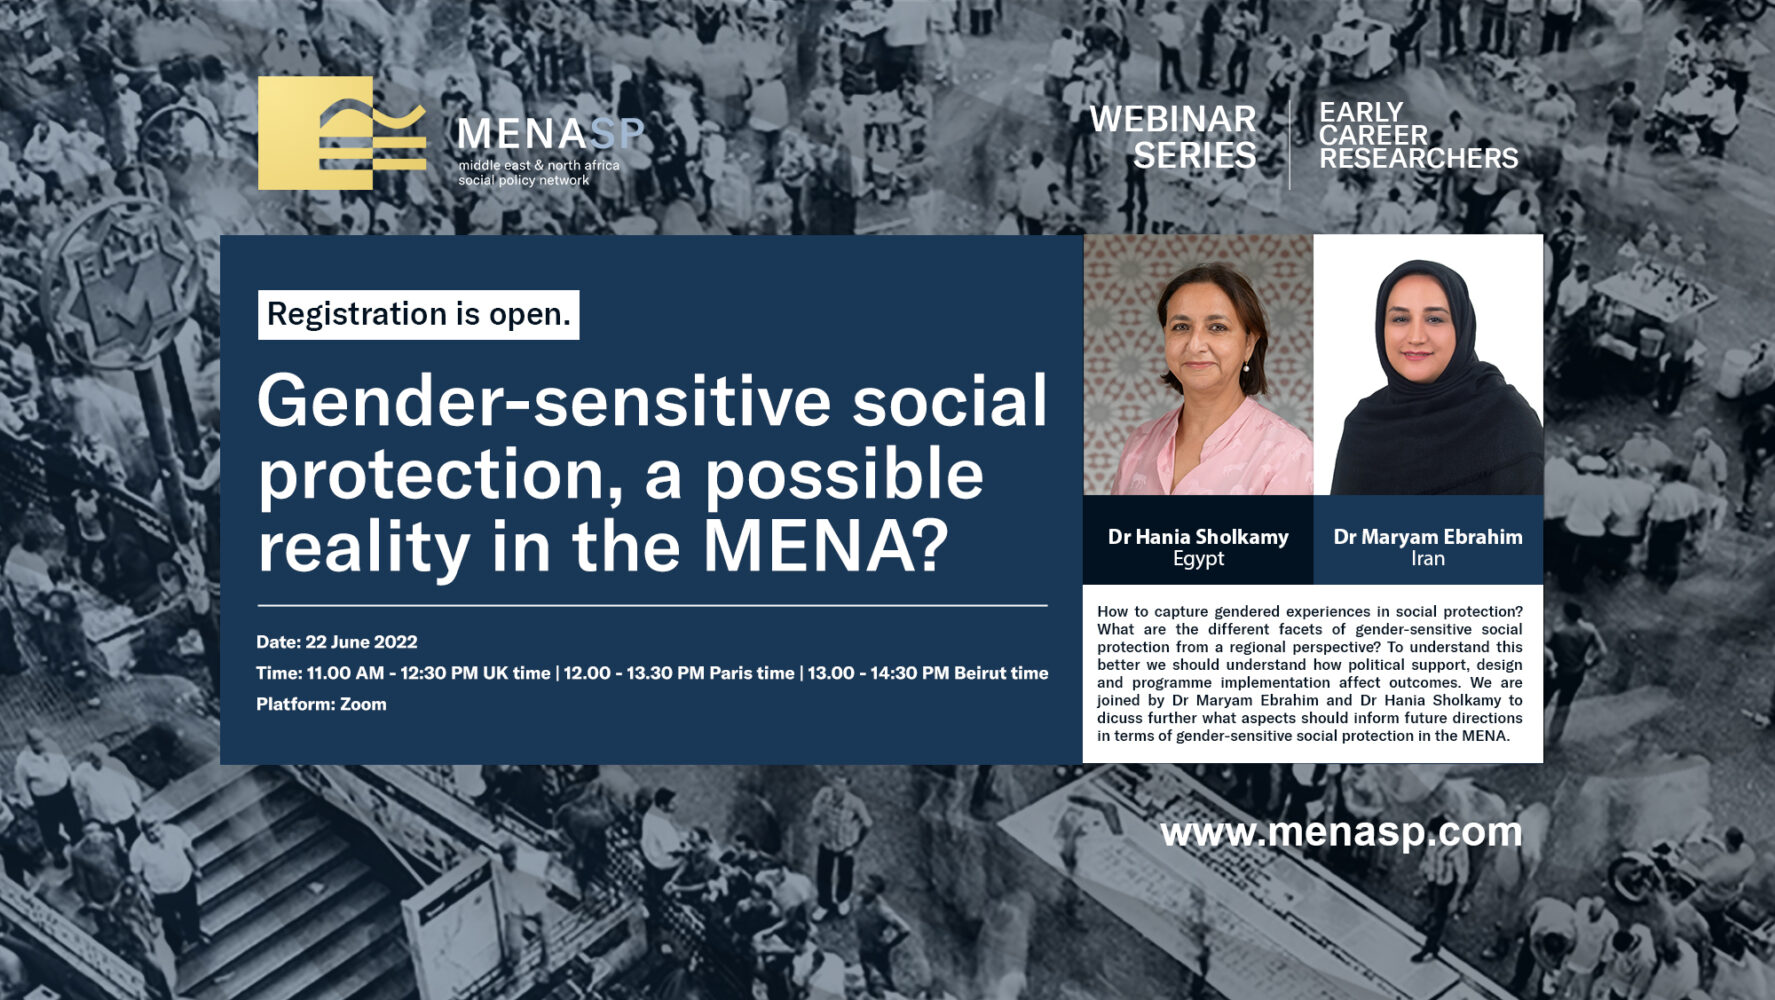 ECR Webinar: Gender-sensitive social protection, a possible reality in the MENA?